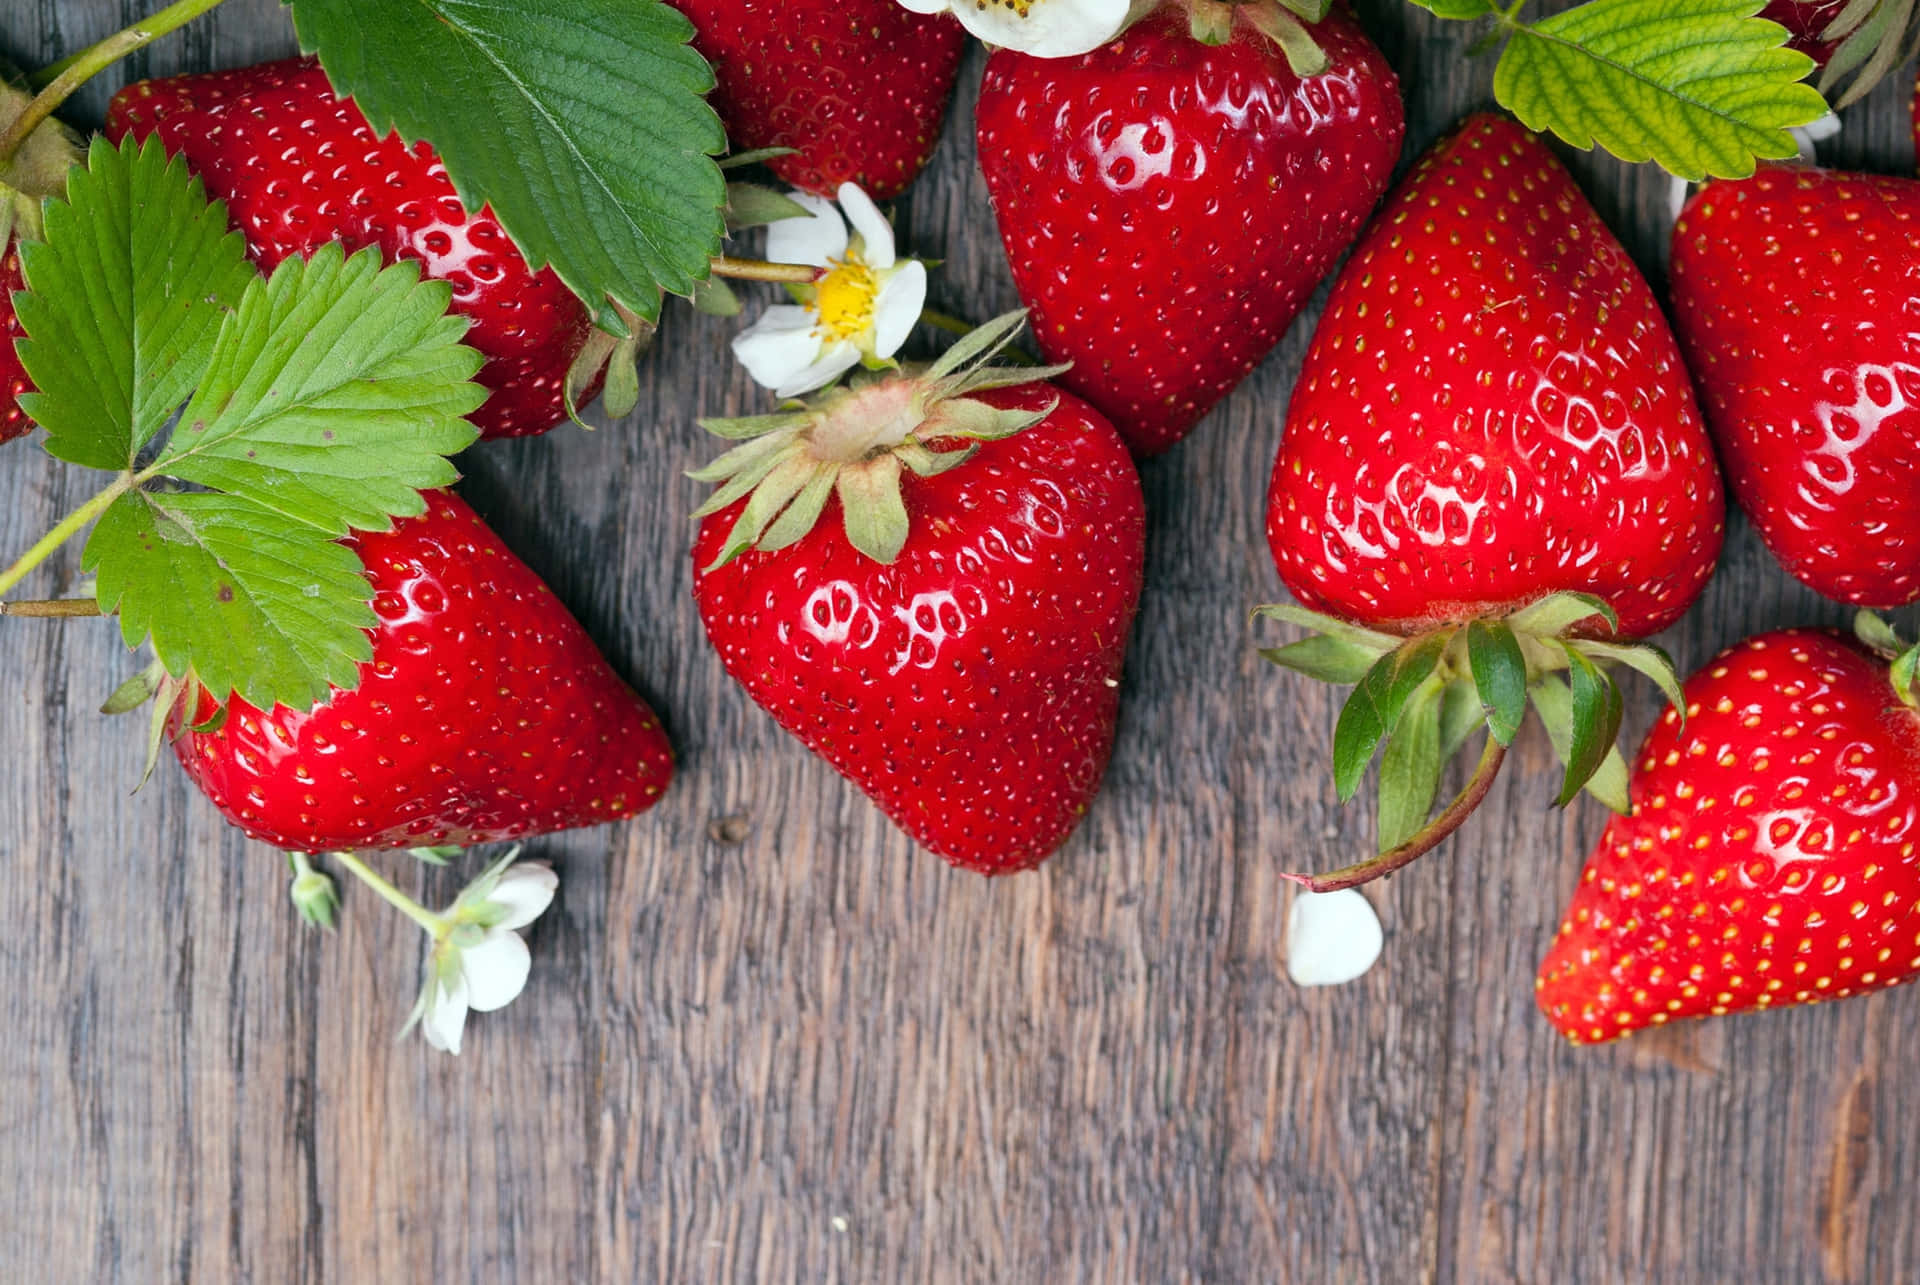 Enjoy the sweetness of summer with fresh, ripe strawberries